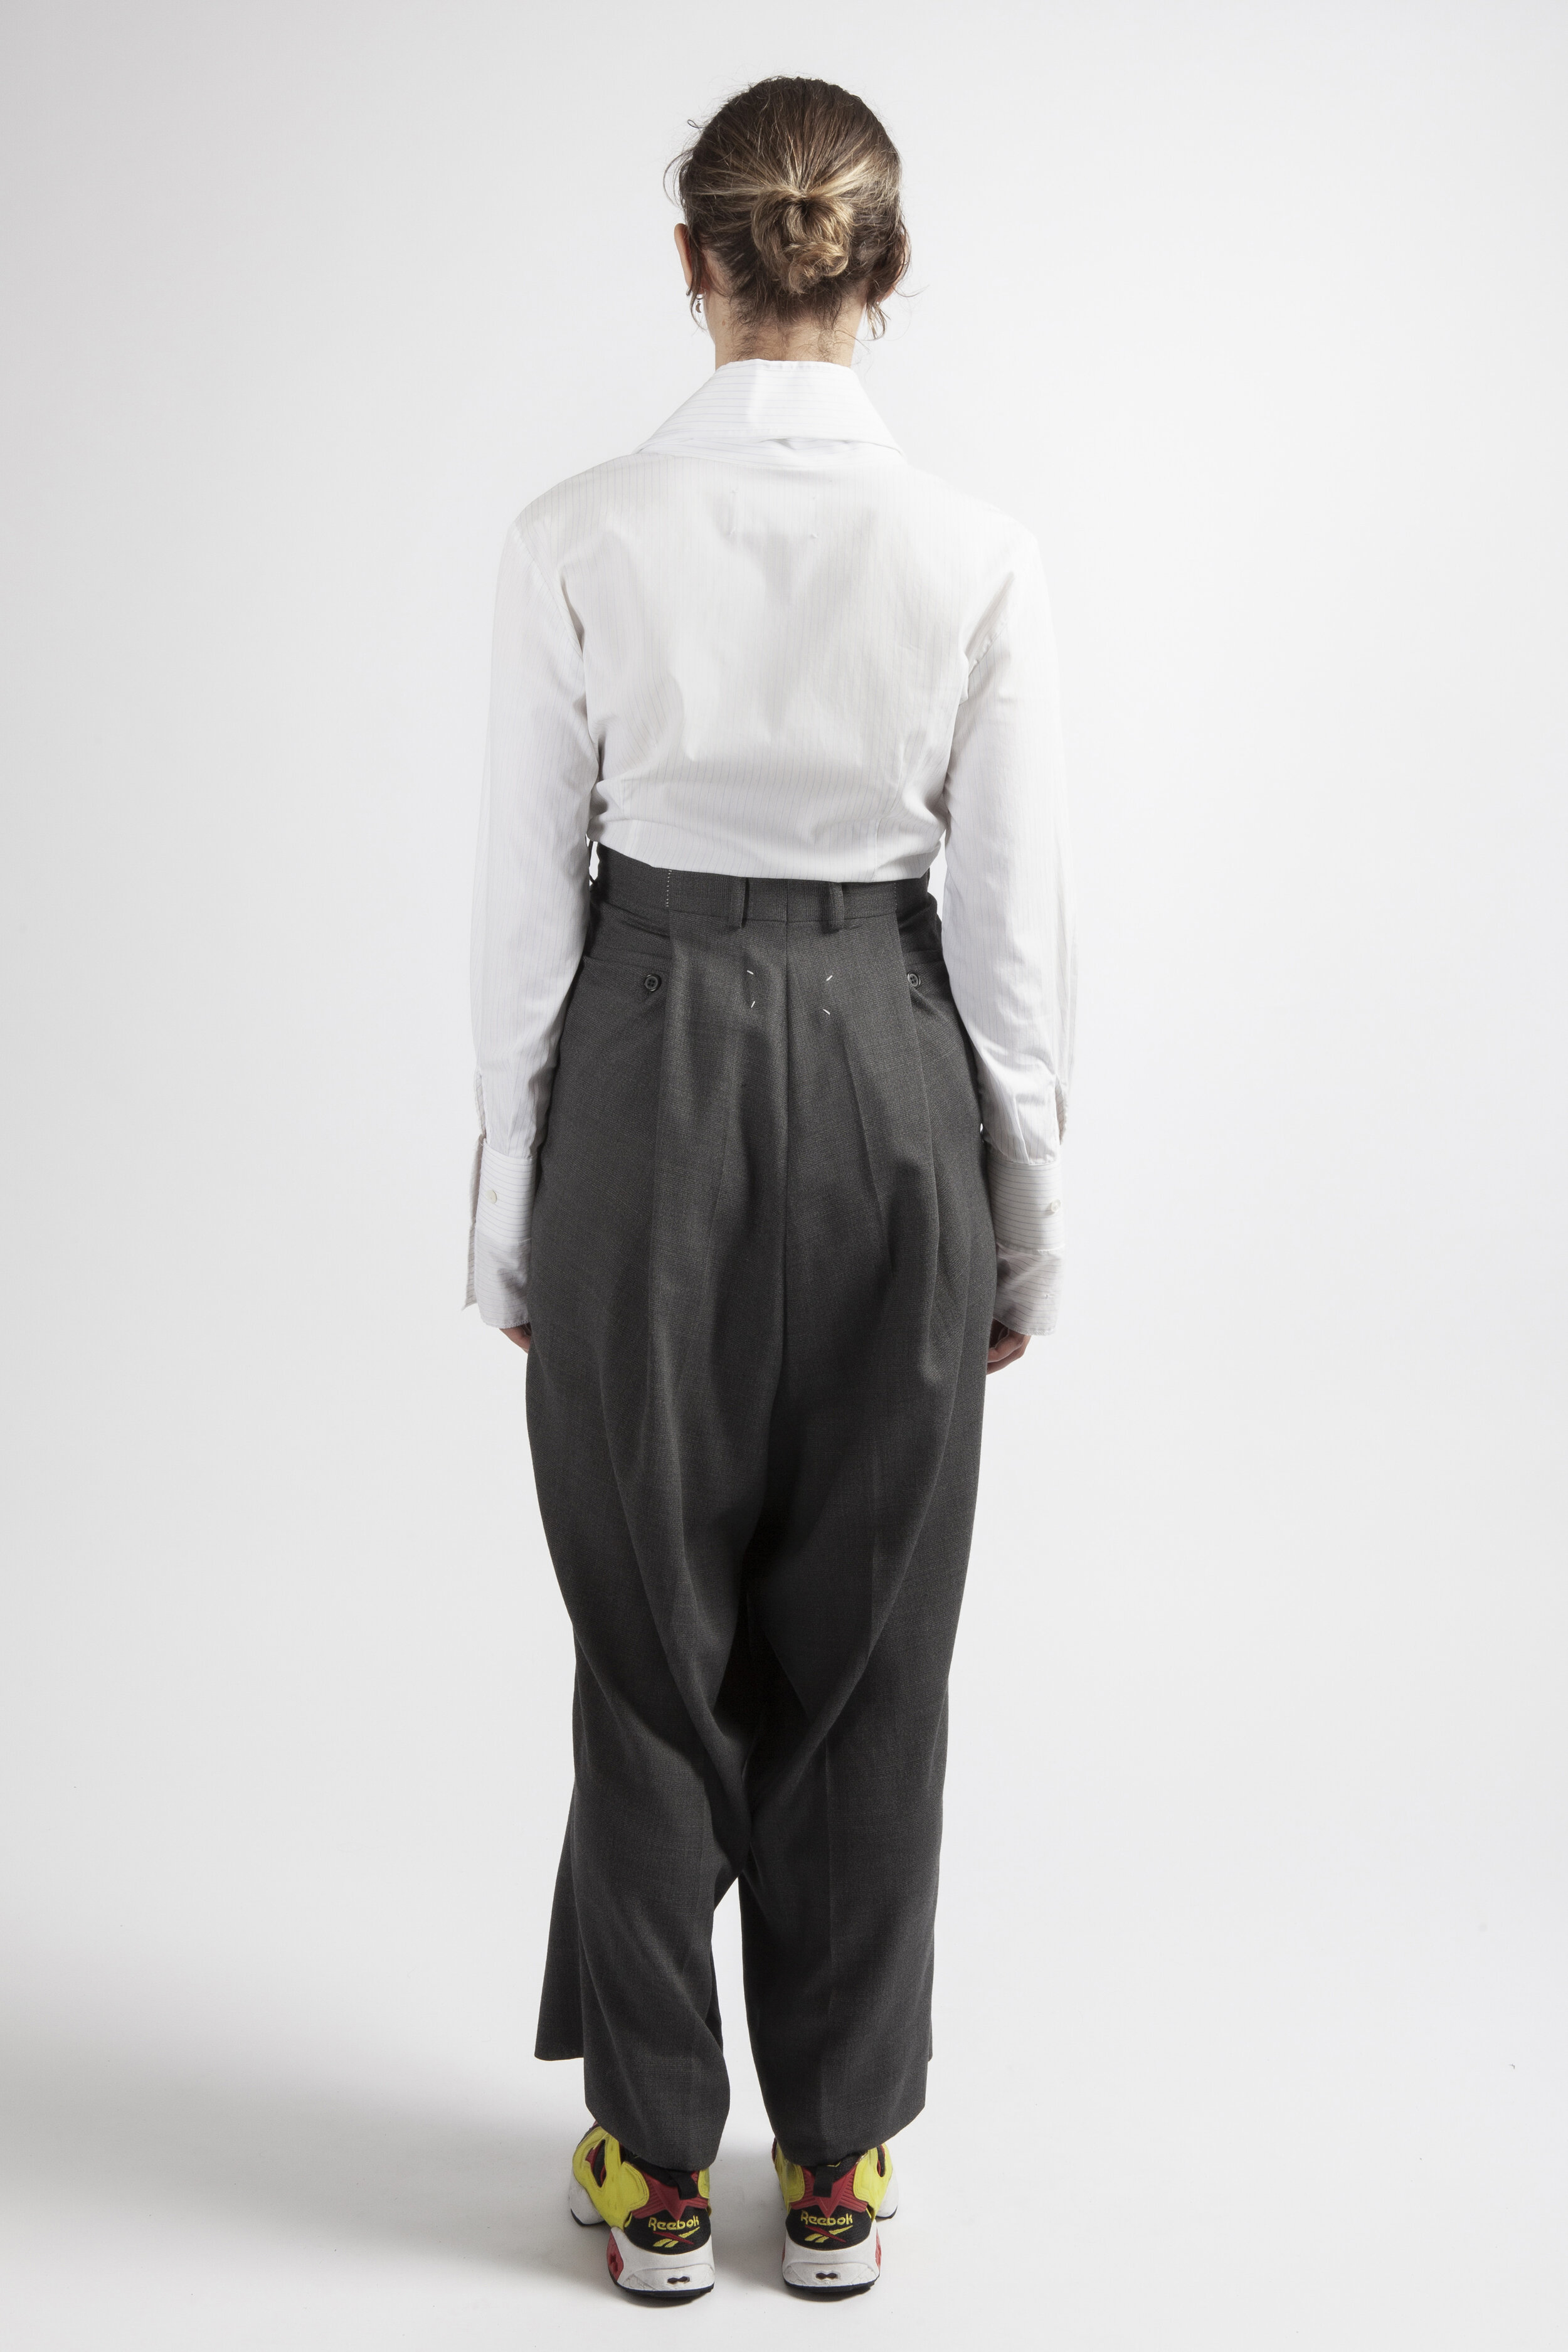 Byronesque Contemporary-Vintage Martin Margiela Trousers, 2000 